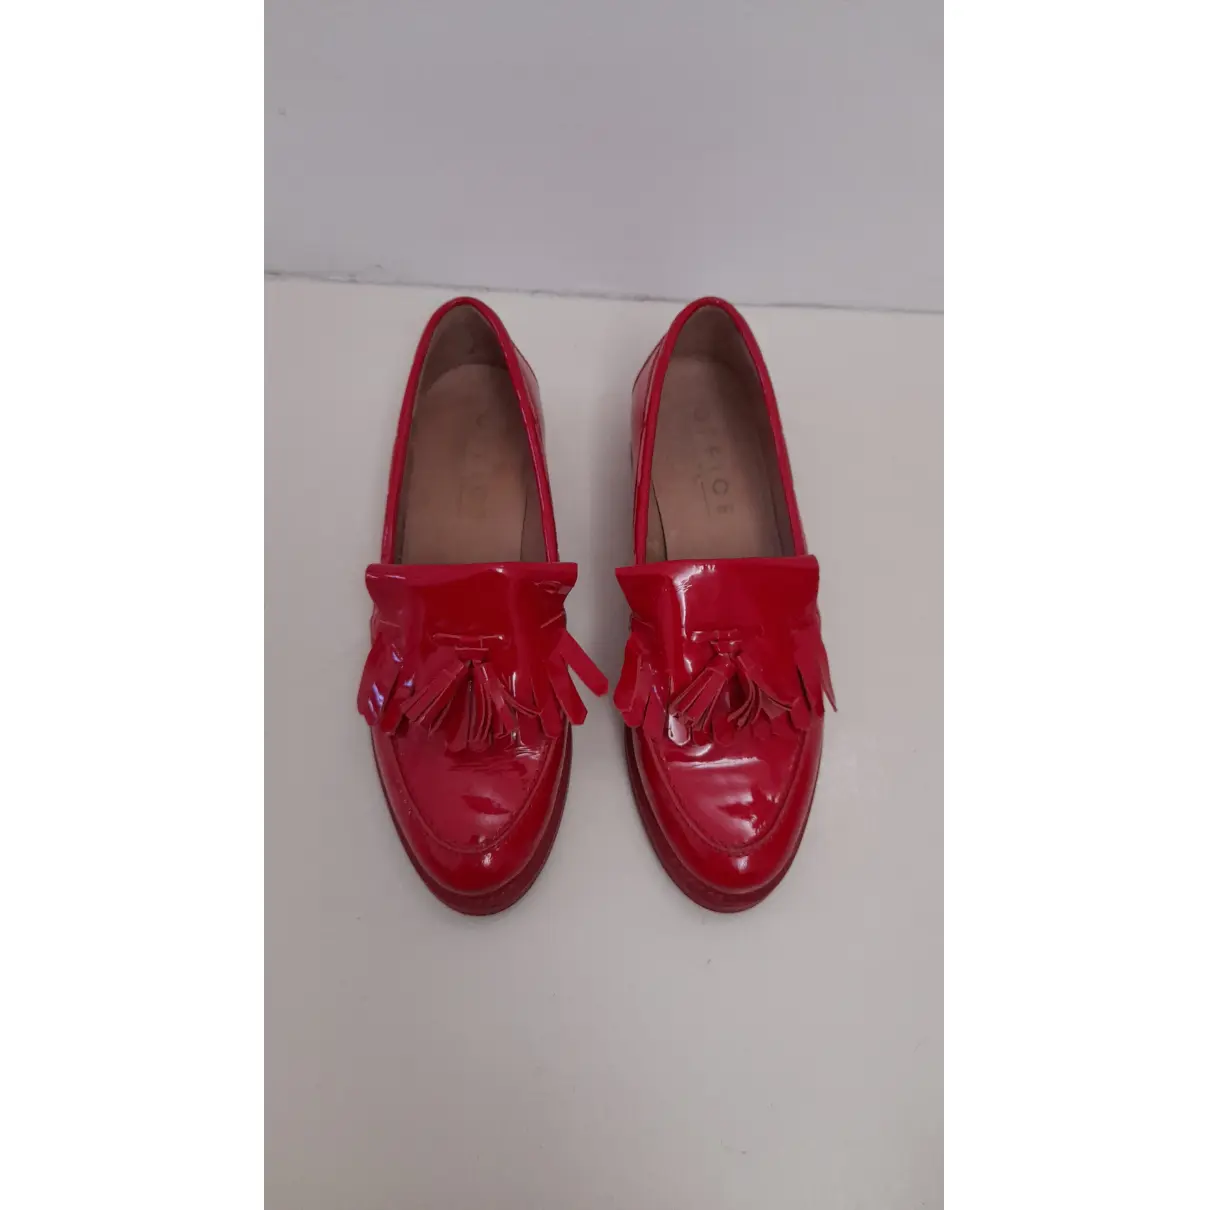 Buy Office London Patent leather flats online